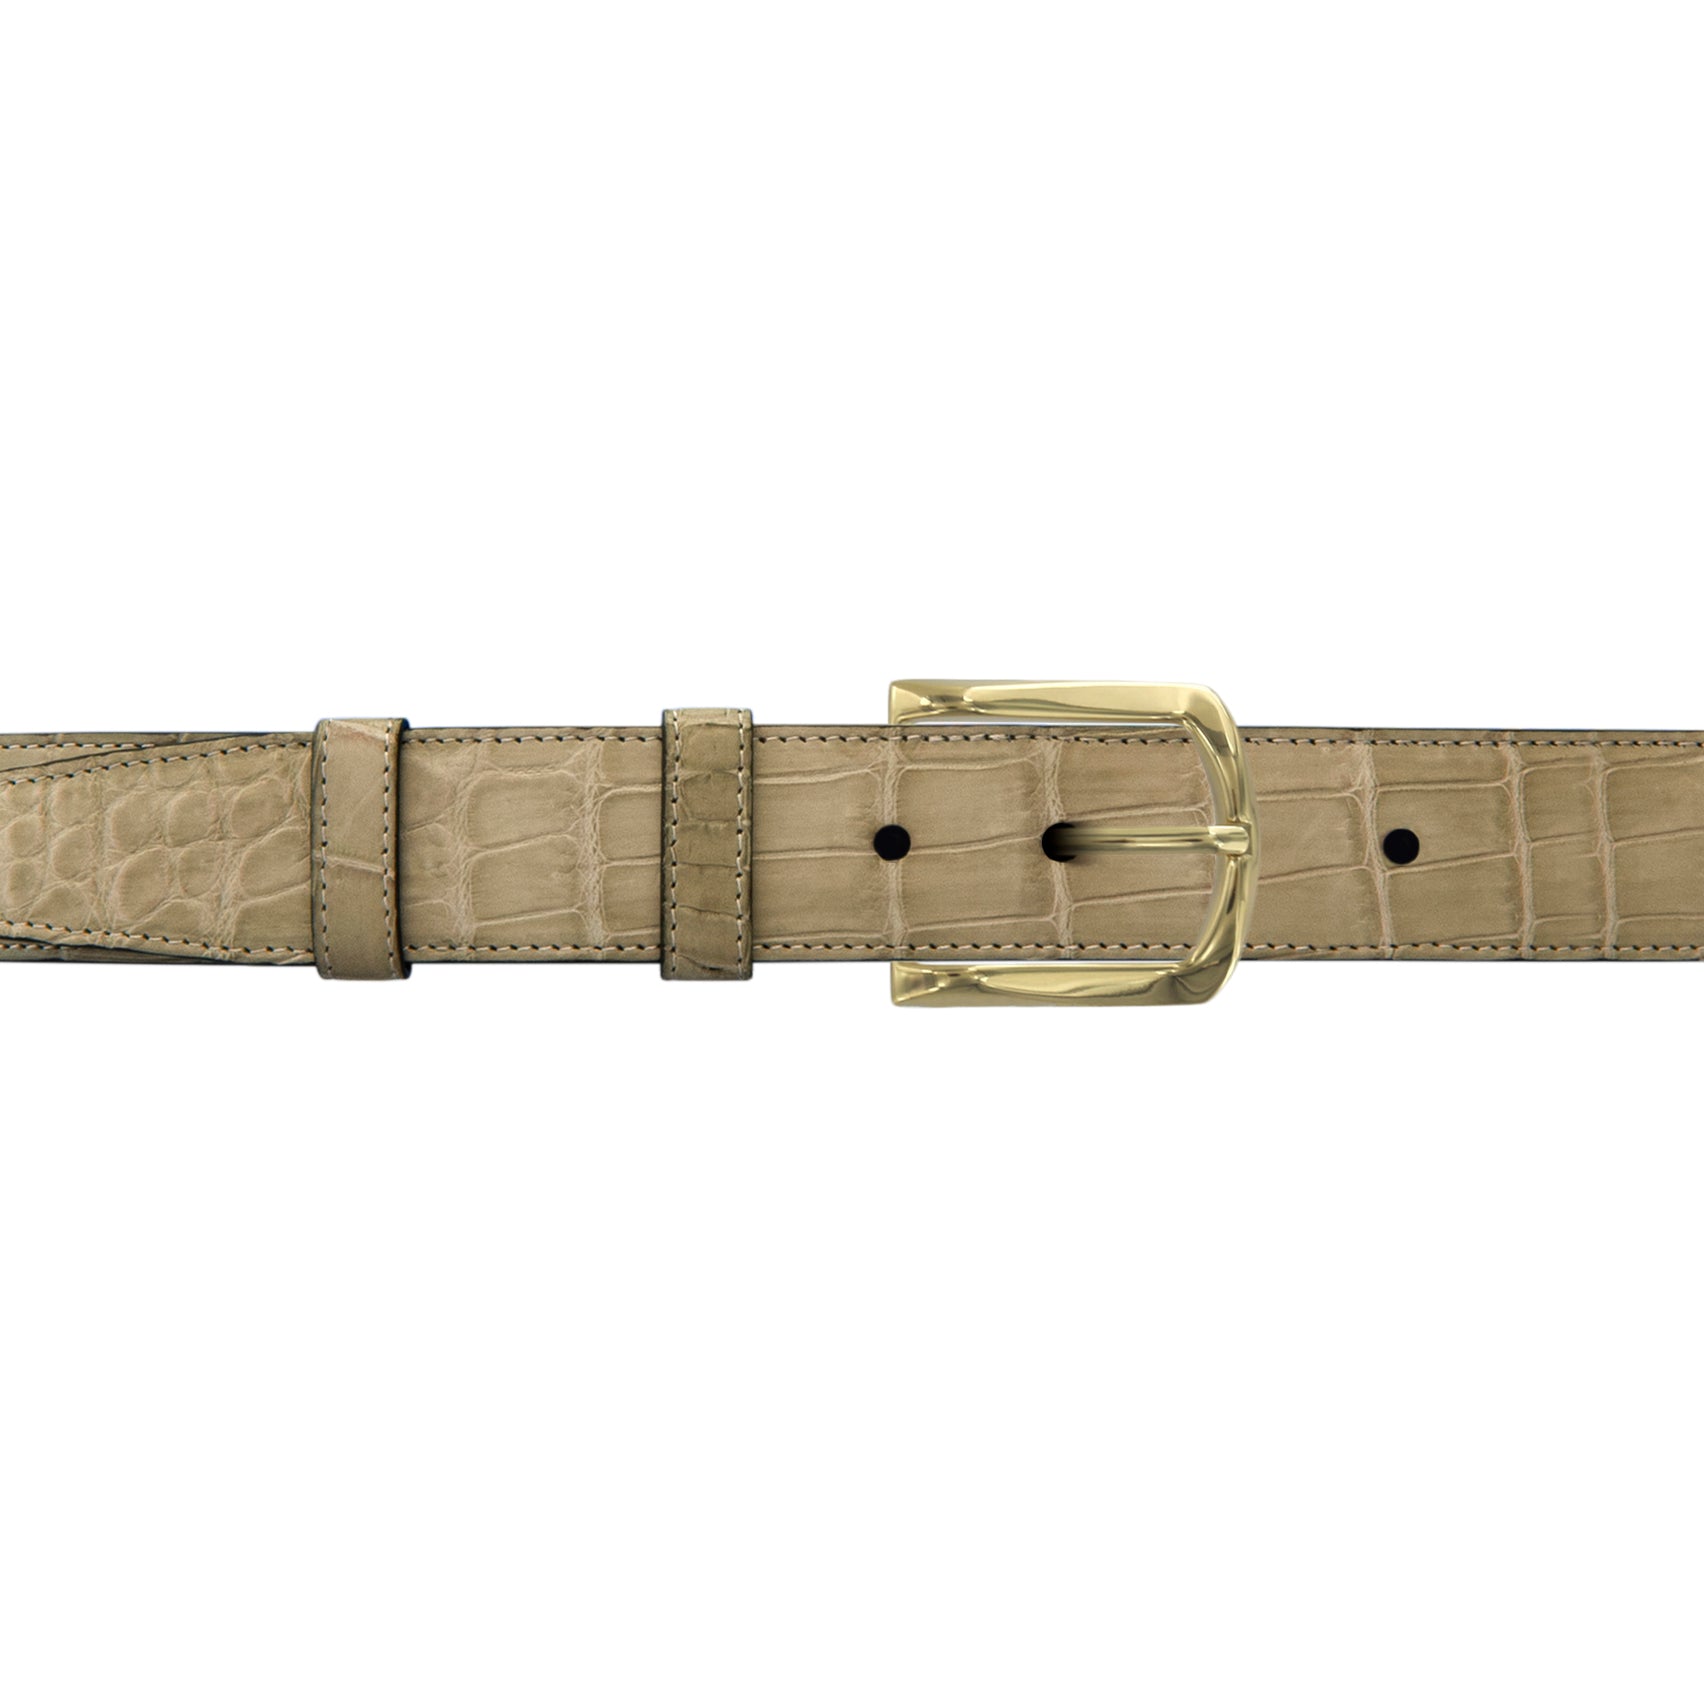 1 1/4" Sand Classic Belt with Sutton Dress Buckle in Brass